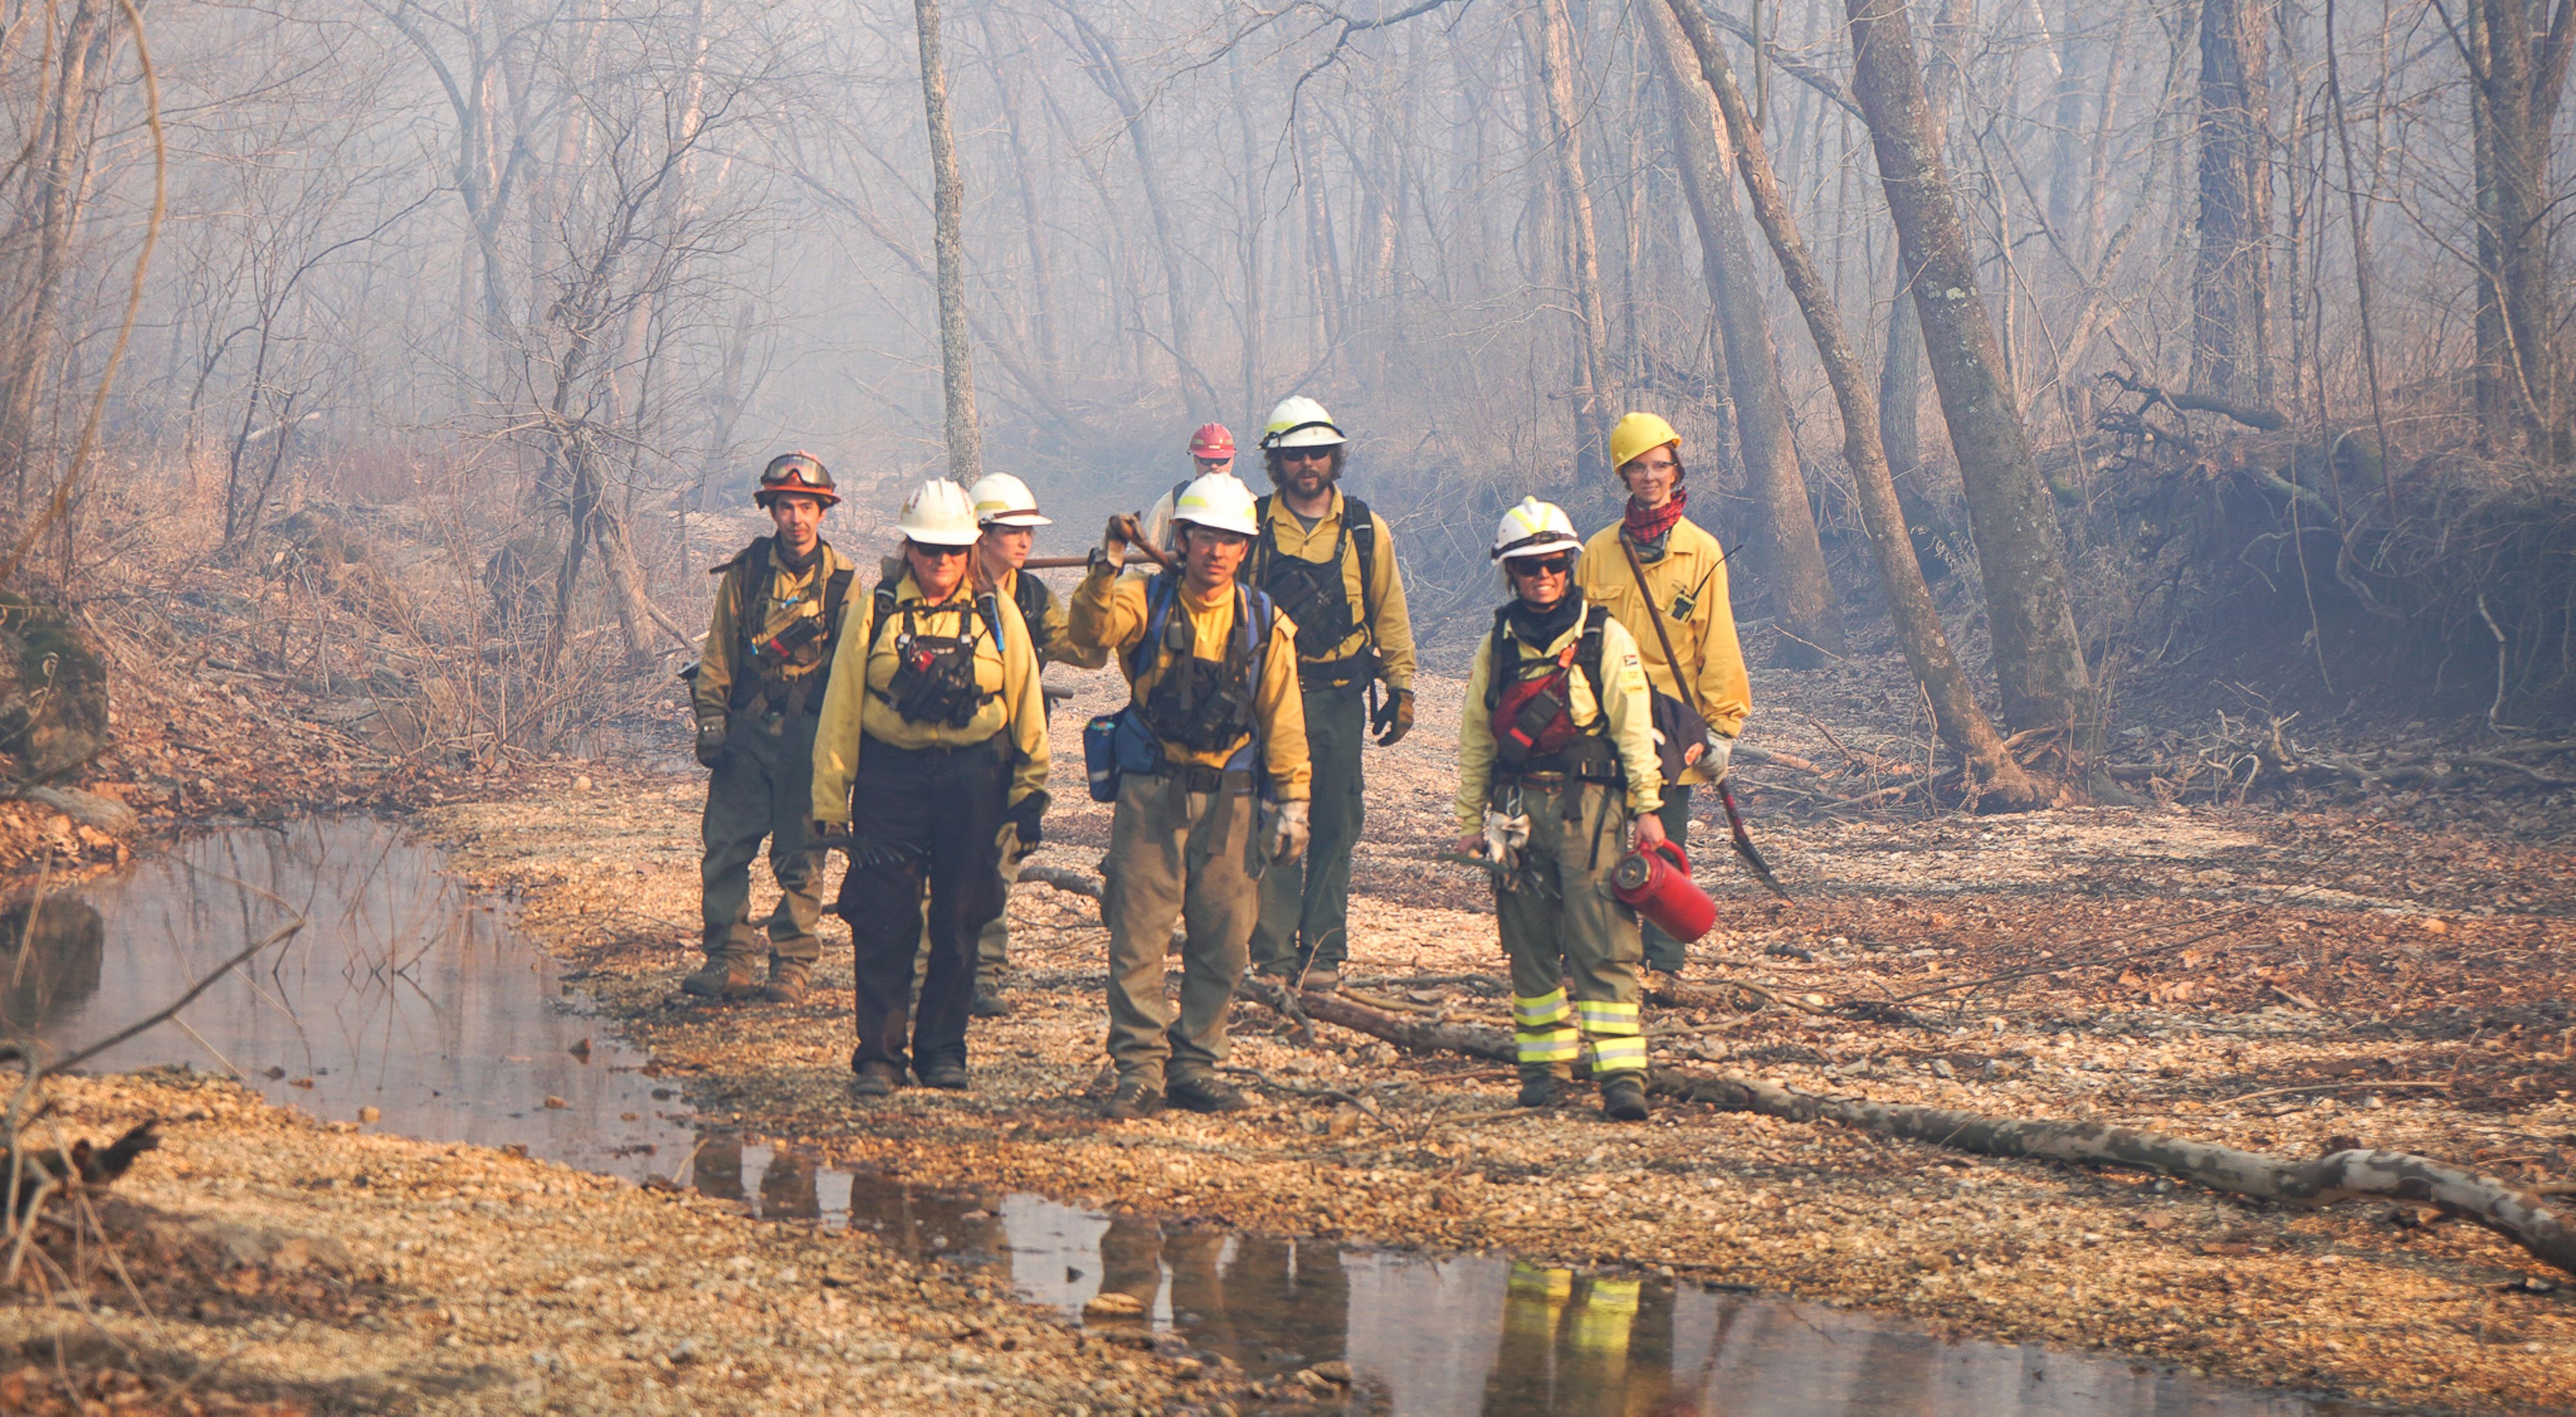 Group of fire practioners in yellow helmets and jackets walking through a smokey wooded area